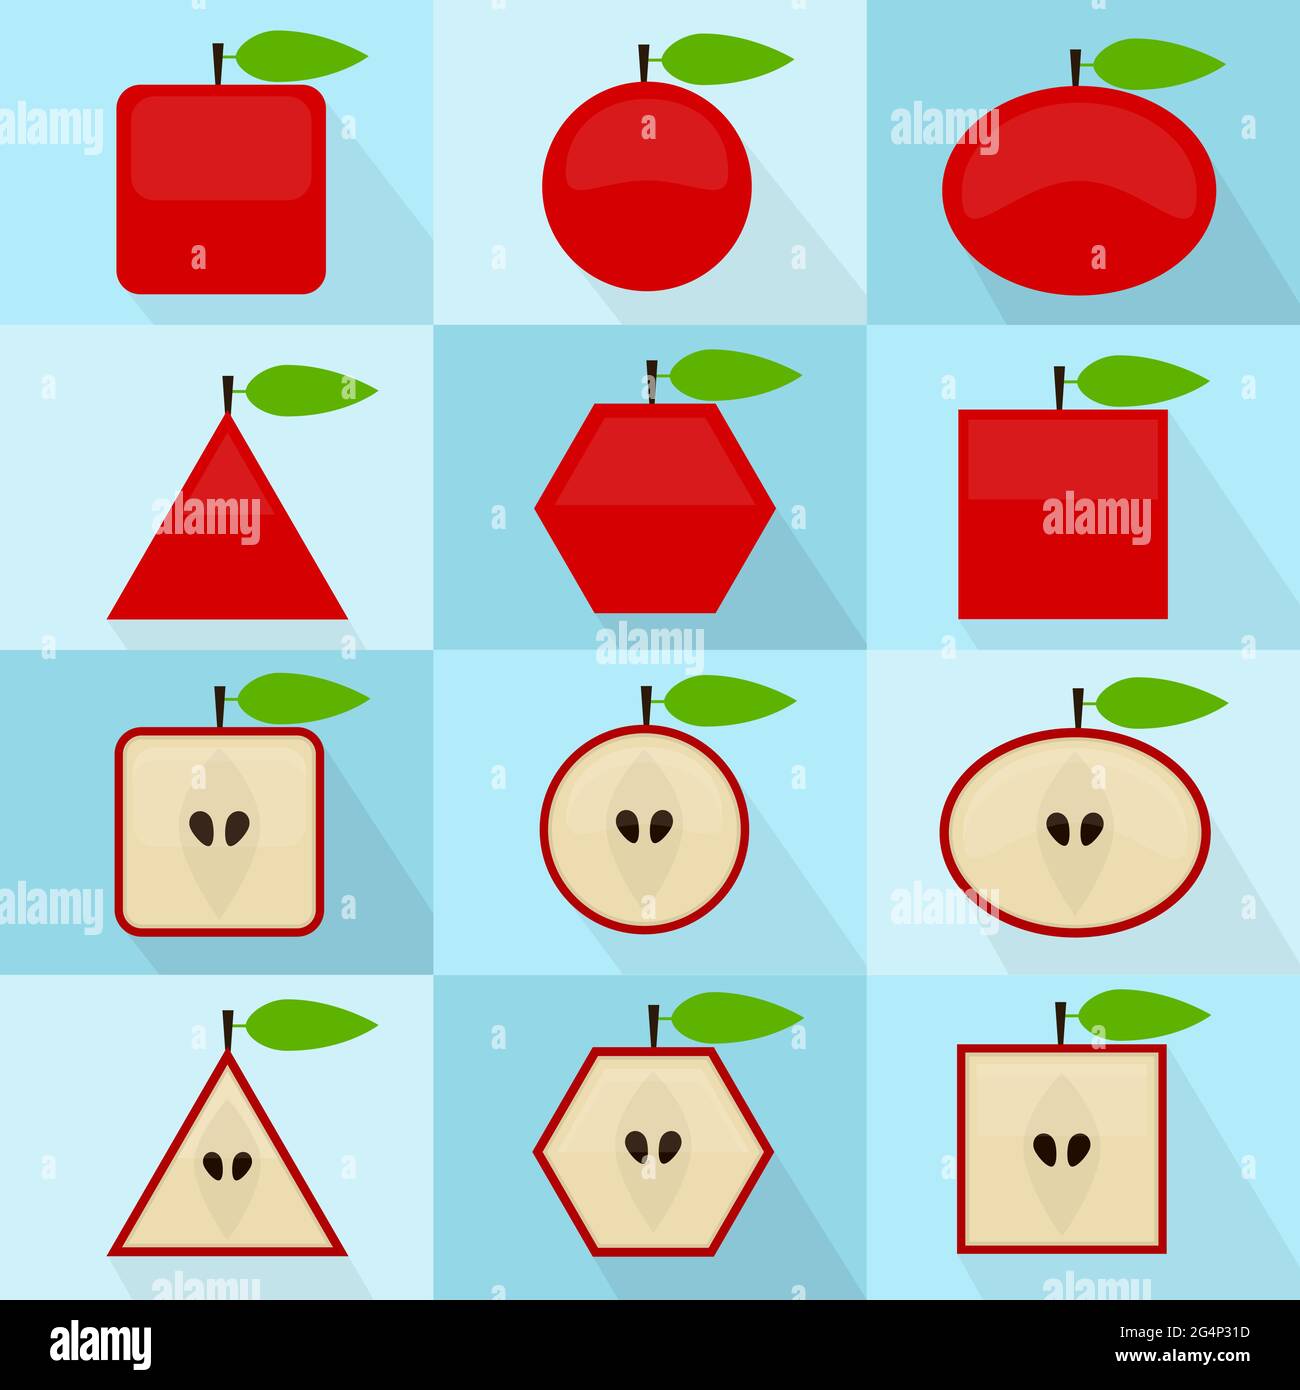 Apple in different geometric shapes. It can be used as icons. Interior and exterior of the fruit. With long shadows. Stock Vector